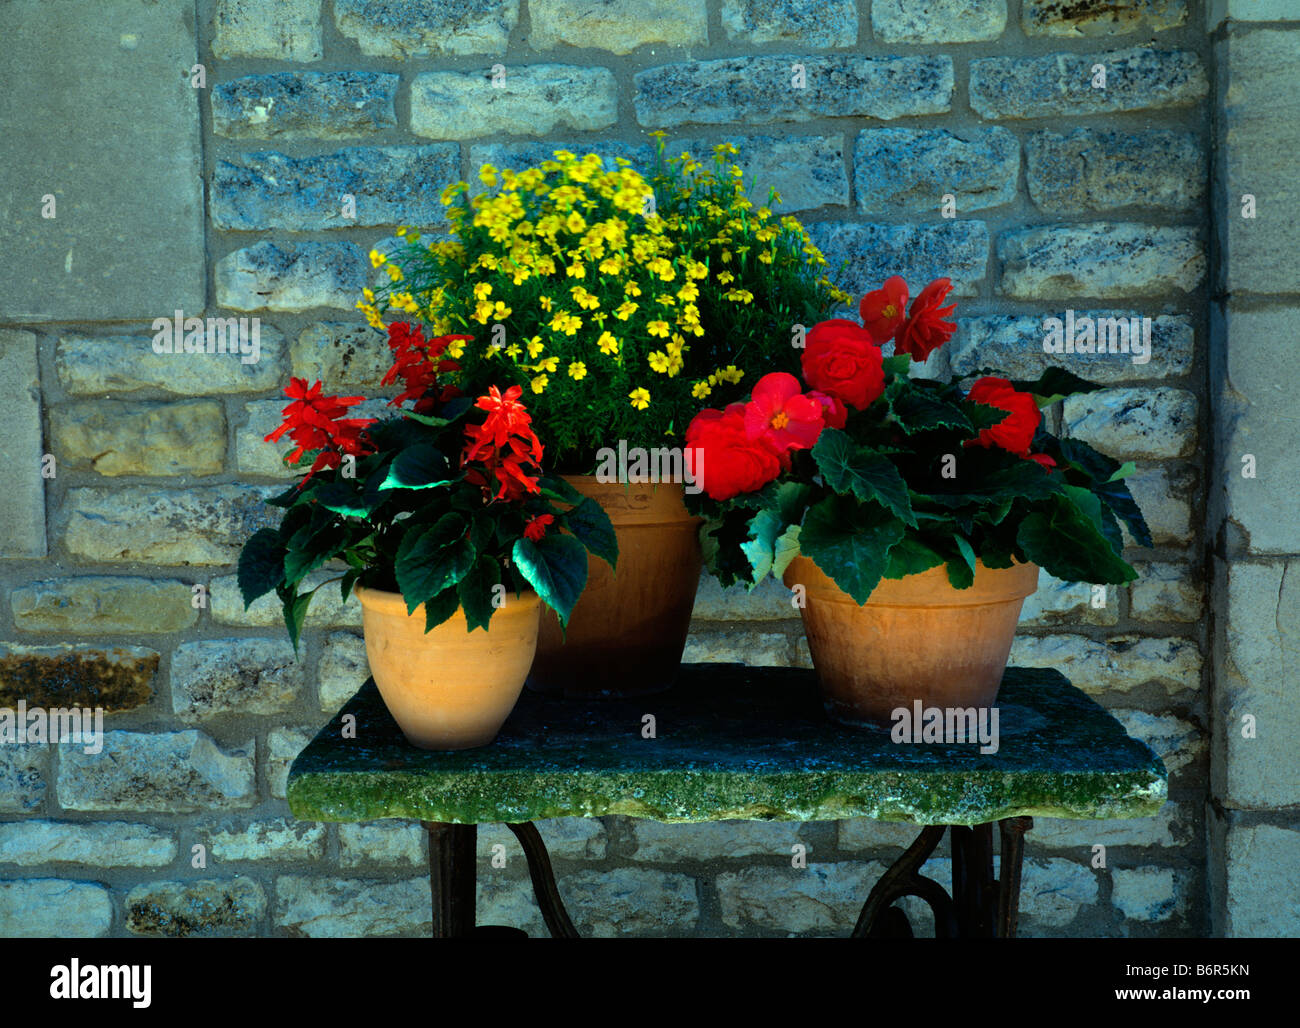 Red and yellow bedding in terracotta pots Stock Photo